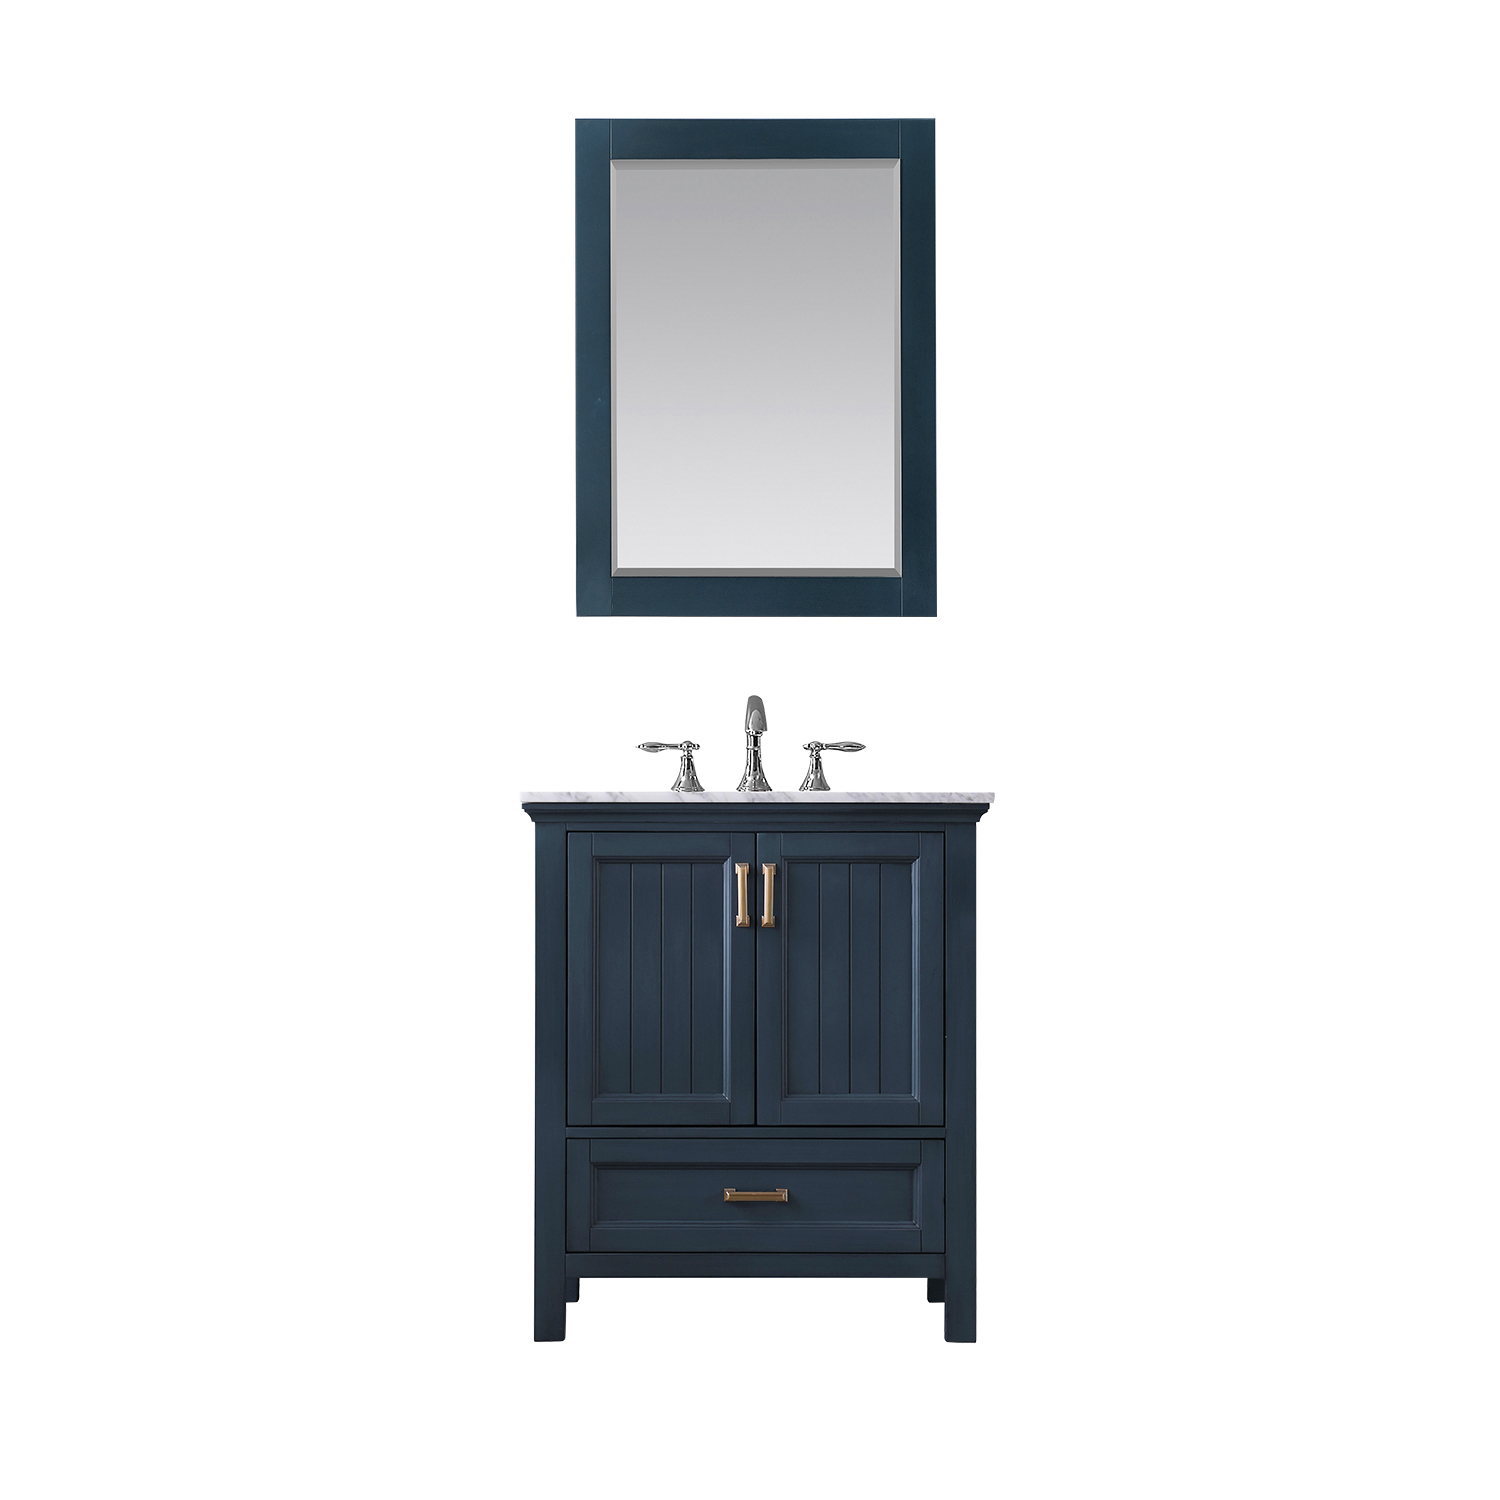 Issac Edwards Collection 30" Single Bathroom Vanity Set in Classic Blue and Carrara White Marble Countertop without Mirror 